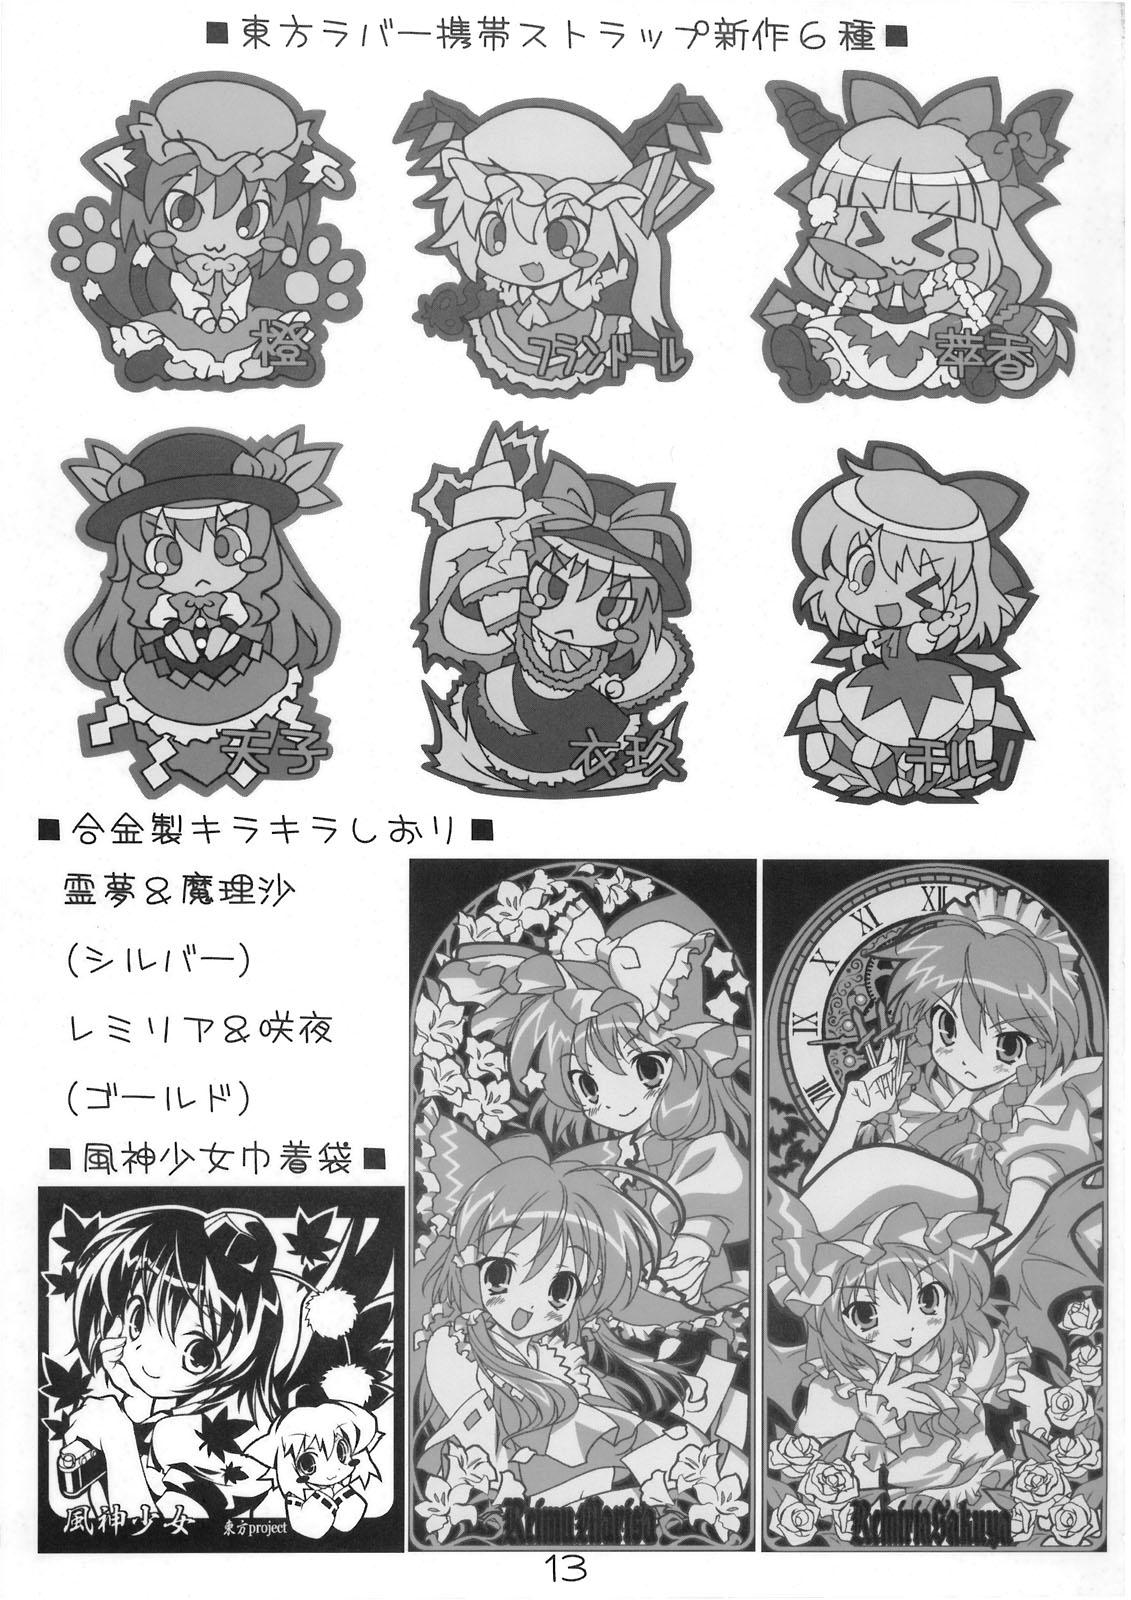 Eating Pussy 私たち百合だっていいじゃない - Touhou project Wet Cunts - Page 13